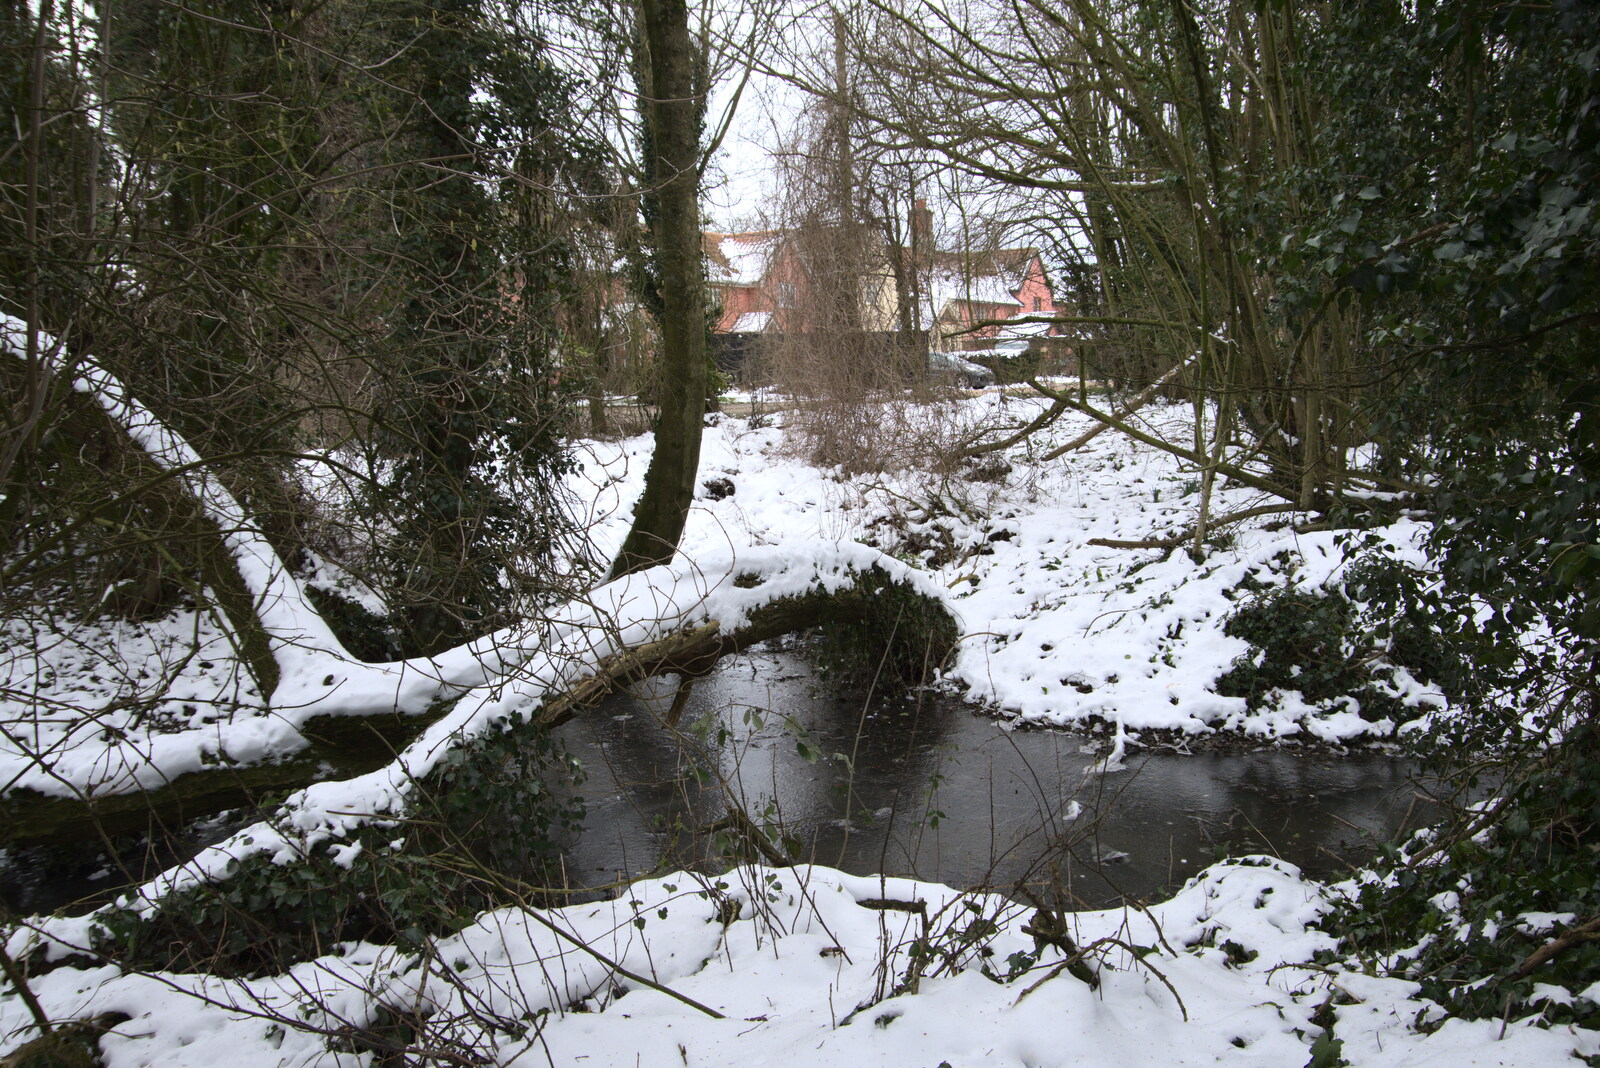 A small wood and pond on Rectory Road from Derelict Infants School and Ice Sculptures, Diss and Palgrave, Norfolk and Suffolk - 13th February 2021